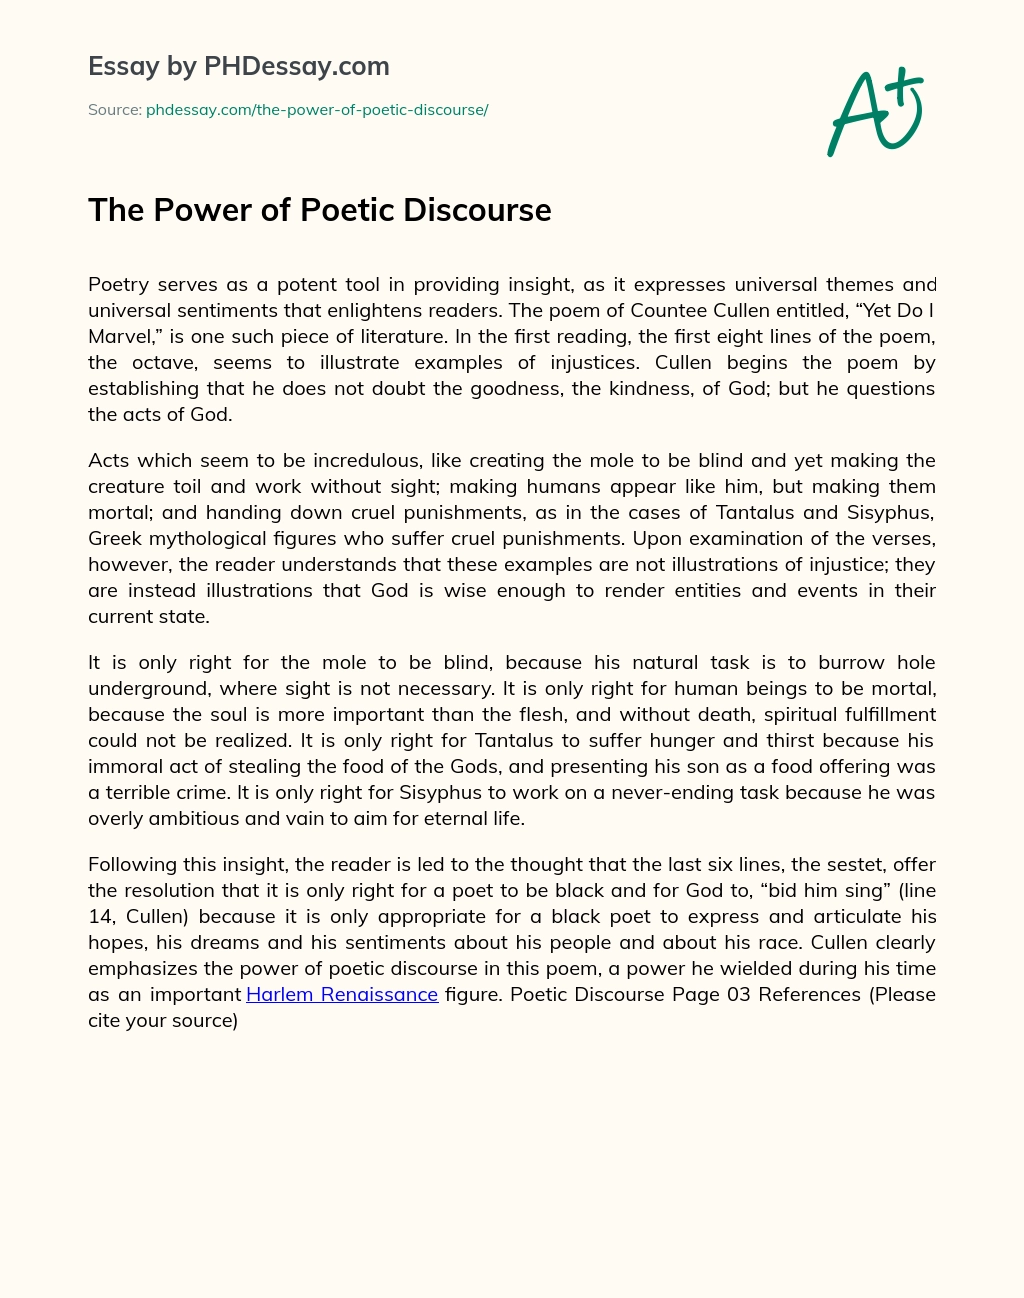 The Power of Poetic Discourse essay